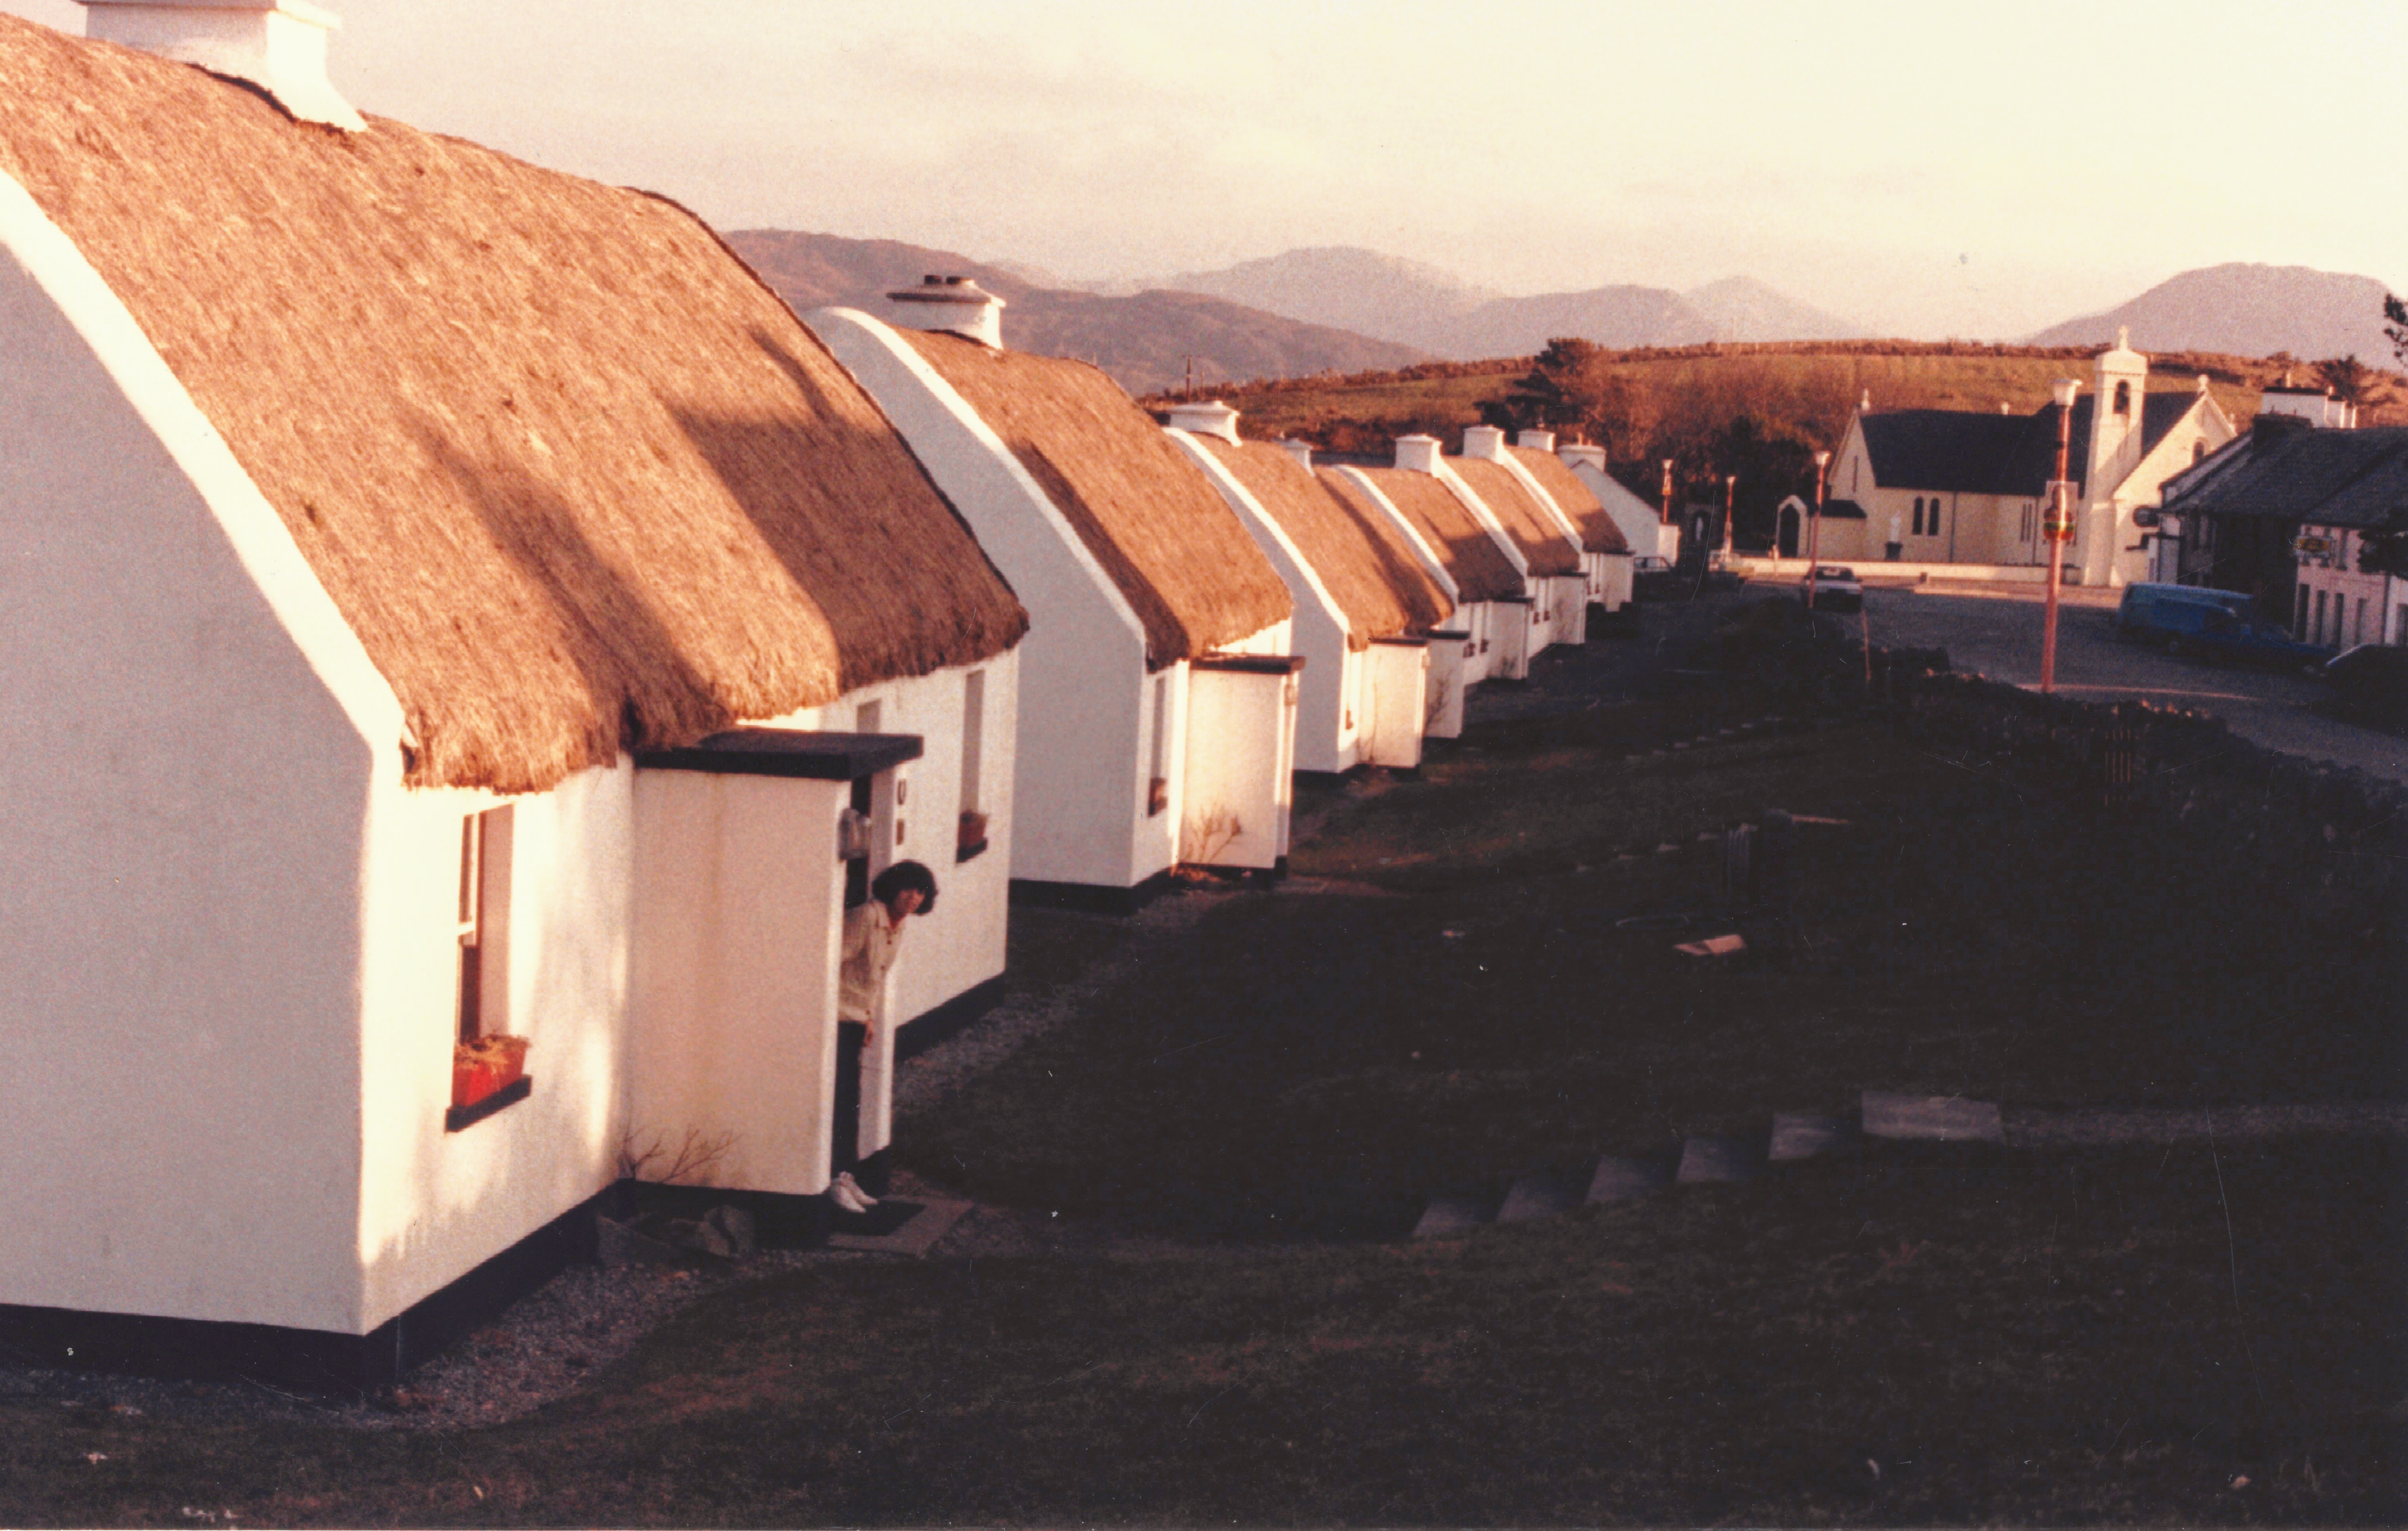 Tully Cross Cottages with thatched roofs in a long line at sunrise